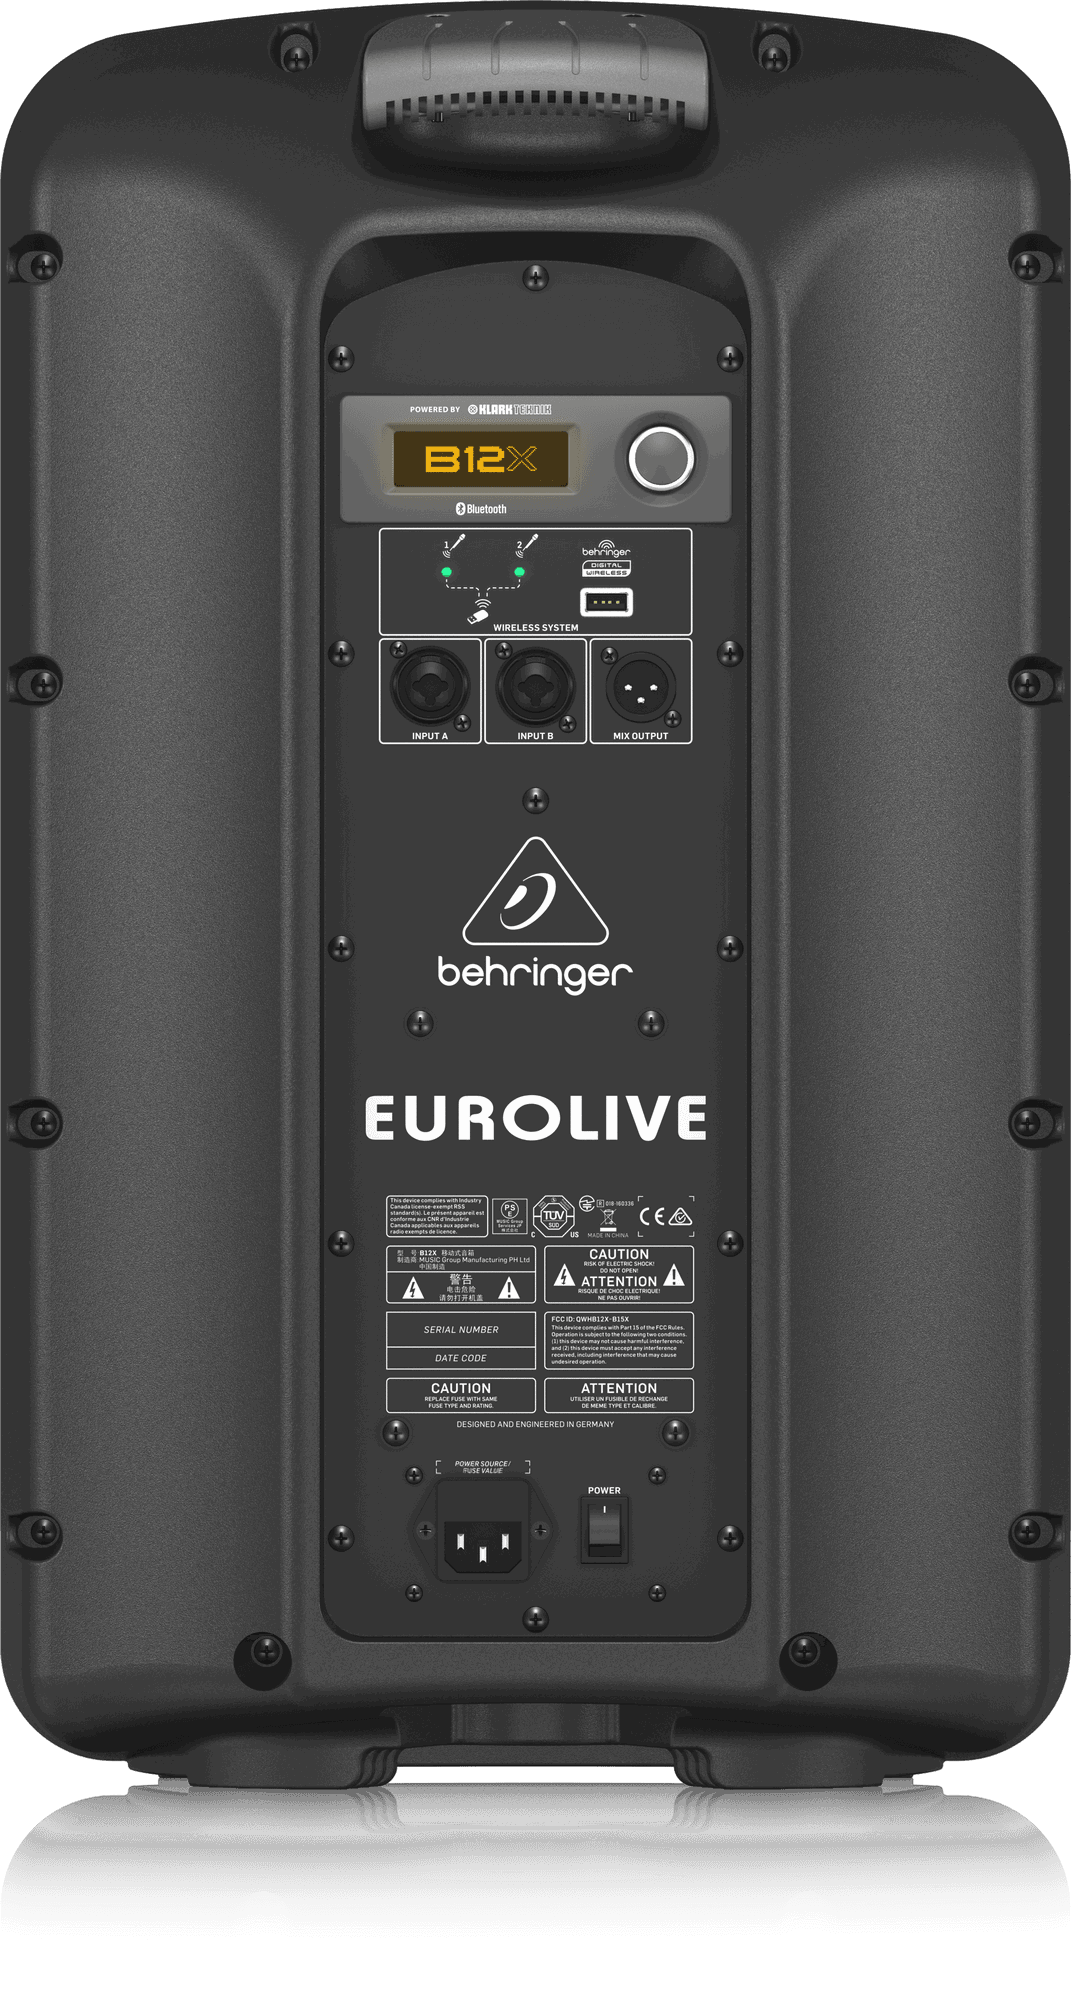 Behringer B12X 1000 Watt 2 Way 12" Powered Loudspeaker with Digital Mixer, Wireless Option, Remote Control via iOS*/Android* Mobile App and Bluetooth Audio Streaming | BEHRINGER , Zoso Music